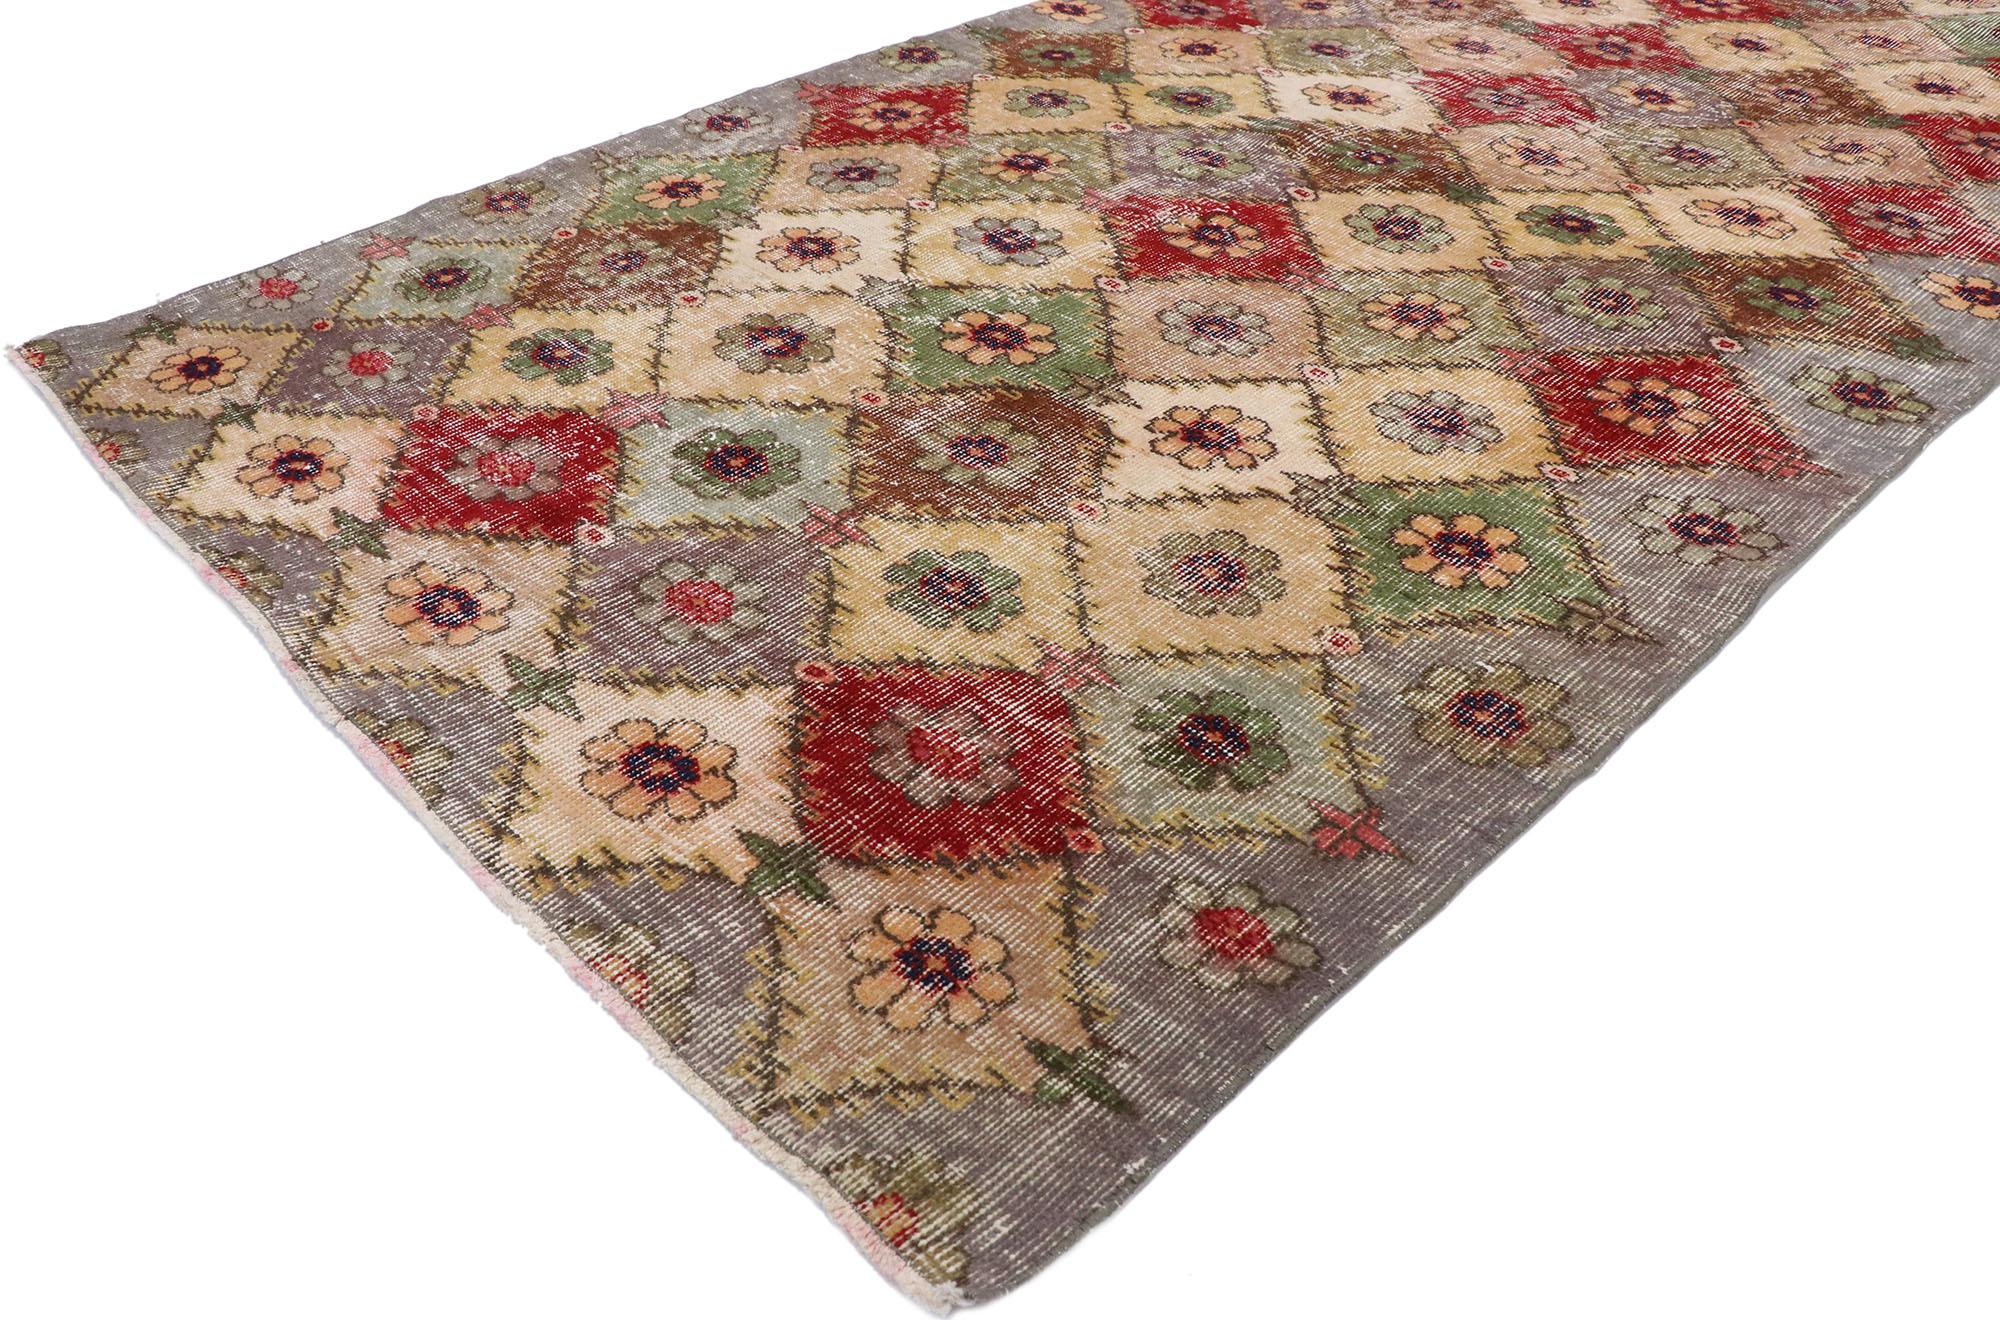 Rustic Distressed Vintage Turkish Sivas Rug with Romantic Shabby Chic Style For Sale